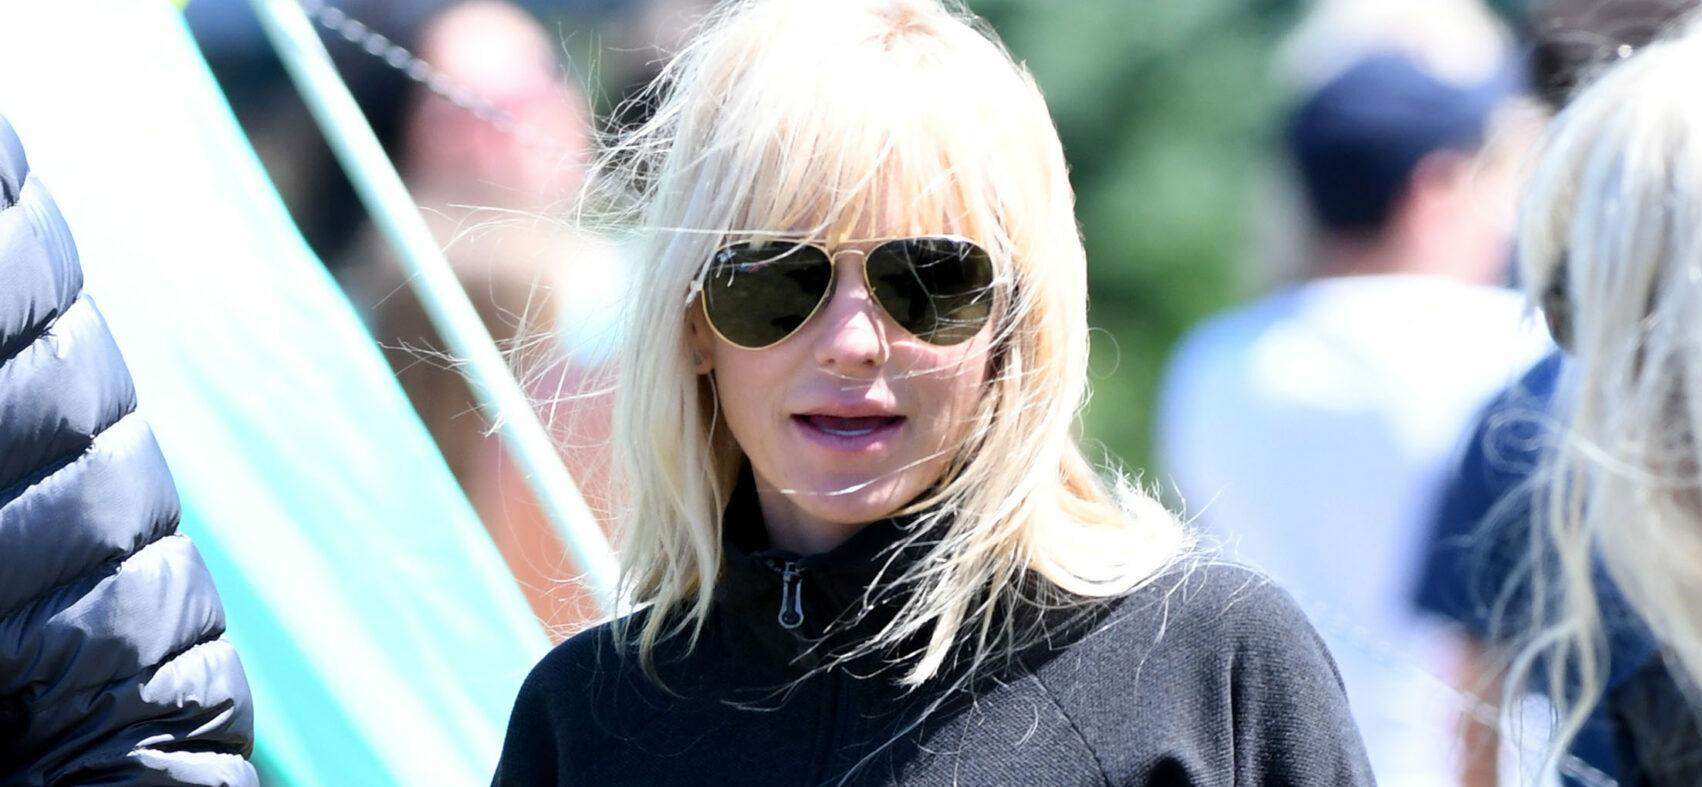 Anna Faris and Eva Longoria enjoy a break together off set as they film Overboard in Canada